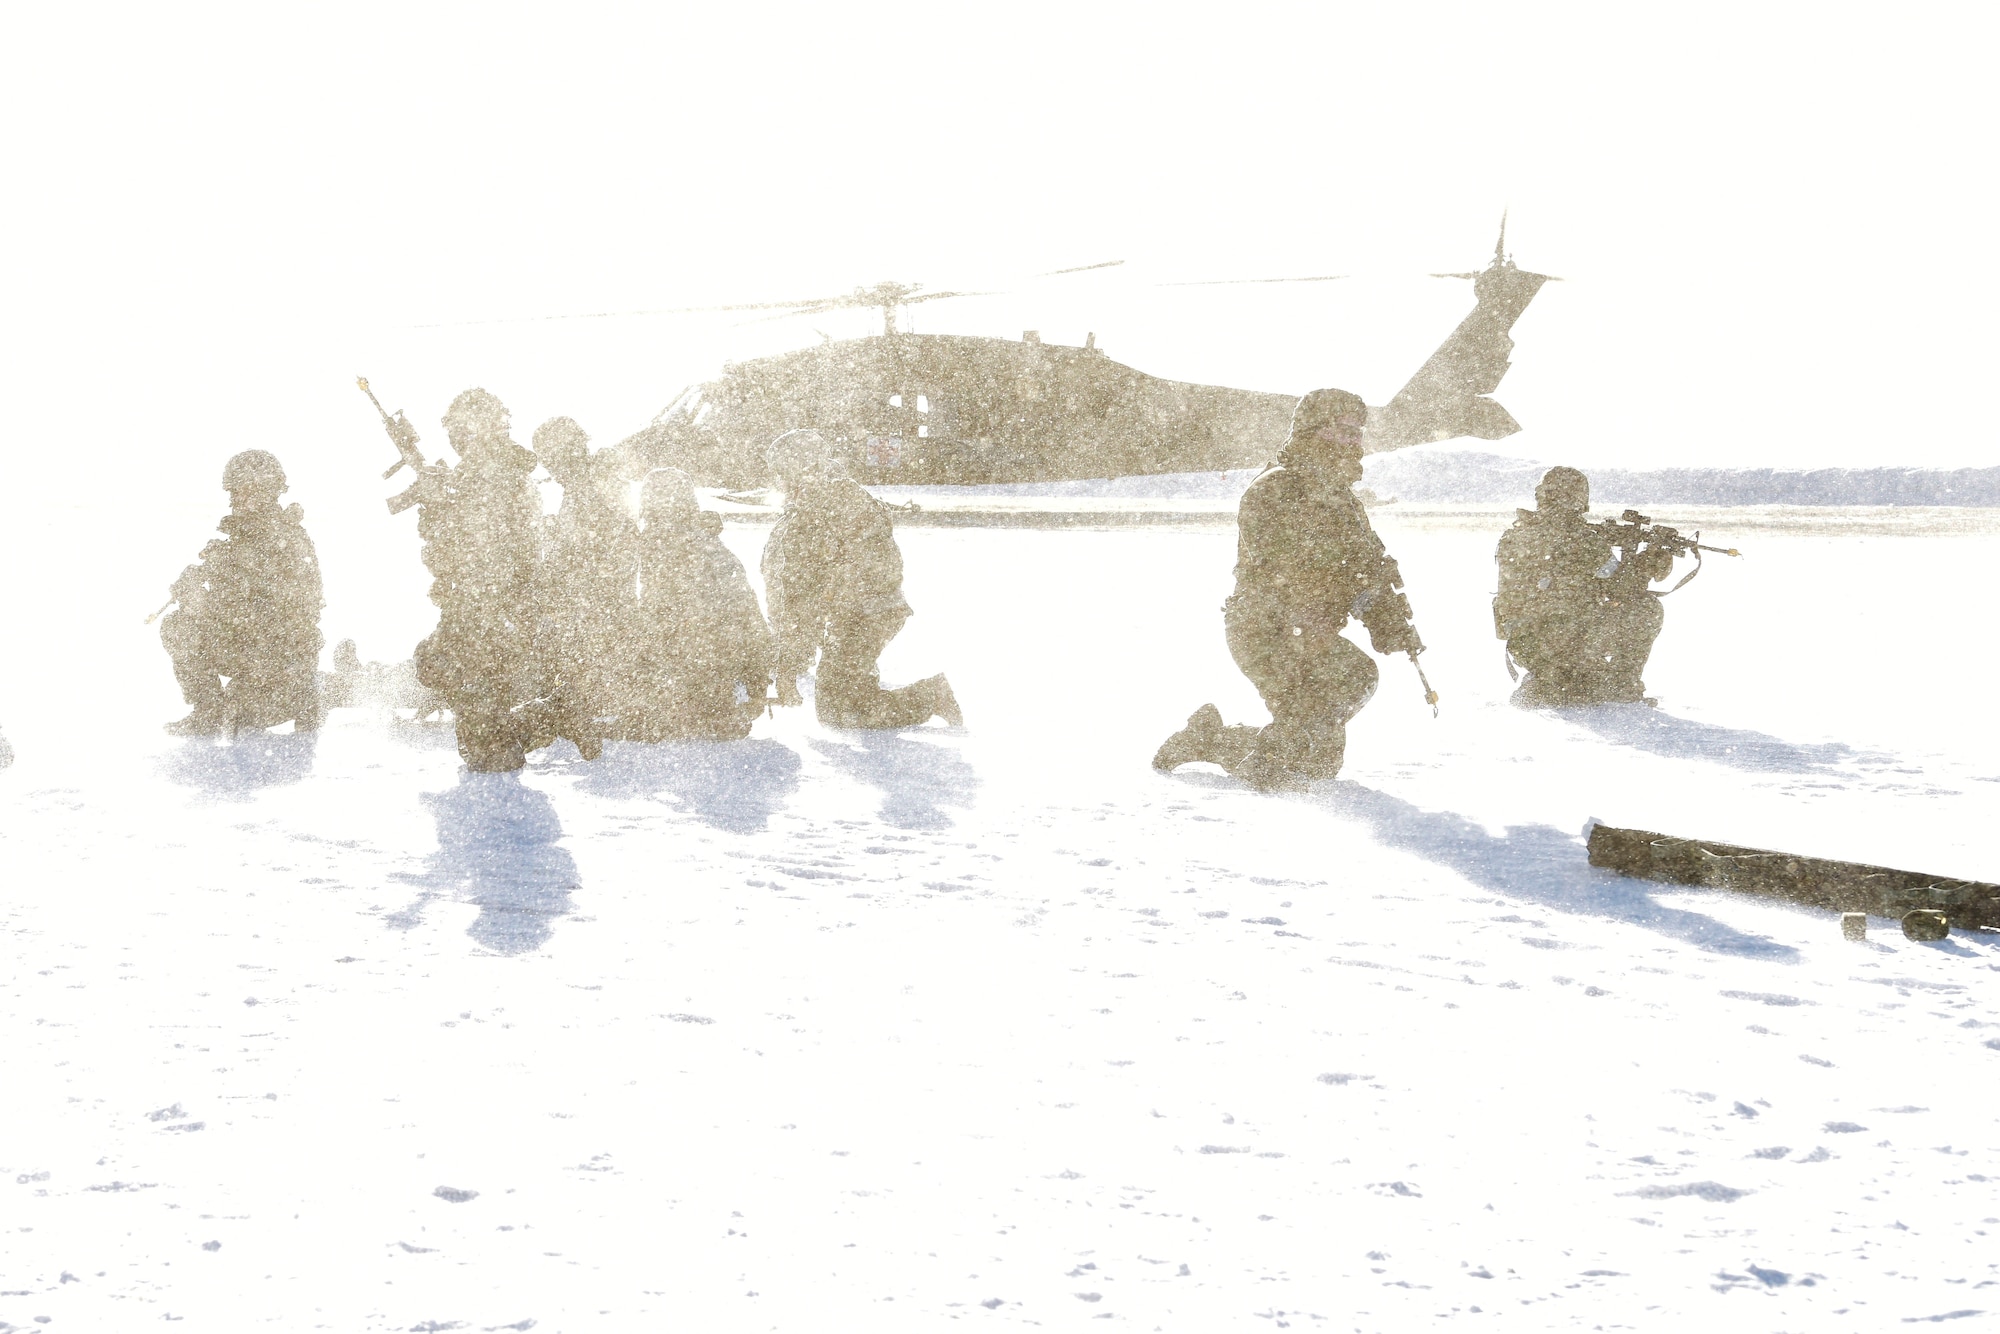 354th Security Forces Squadron defenders hold a perimeter around a simulated casualty while a UH-60 Blackhawk lands during a medical evacuation (MEDEVAC) exercise on Eielson Air Force Base, Alaska, Feb. 26, 2020. While waiting for the MEDEVAC, defenders must hold a perimeter around the casualty until help arrives. (U.S. Air Force photo by Senior Airman Beaux Hebert)